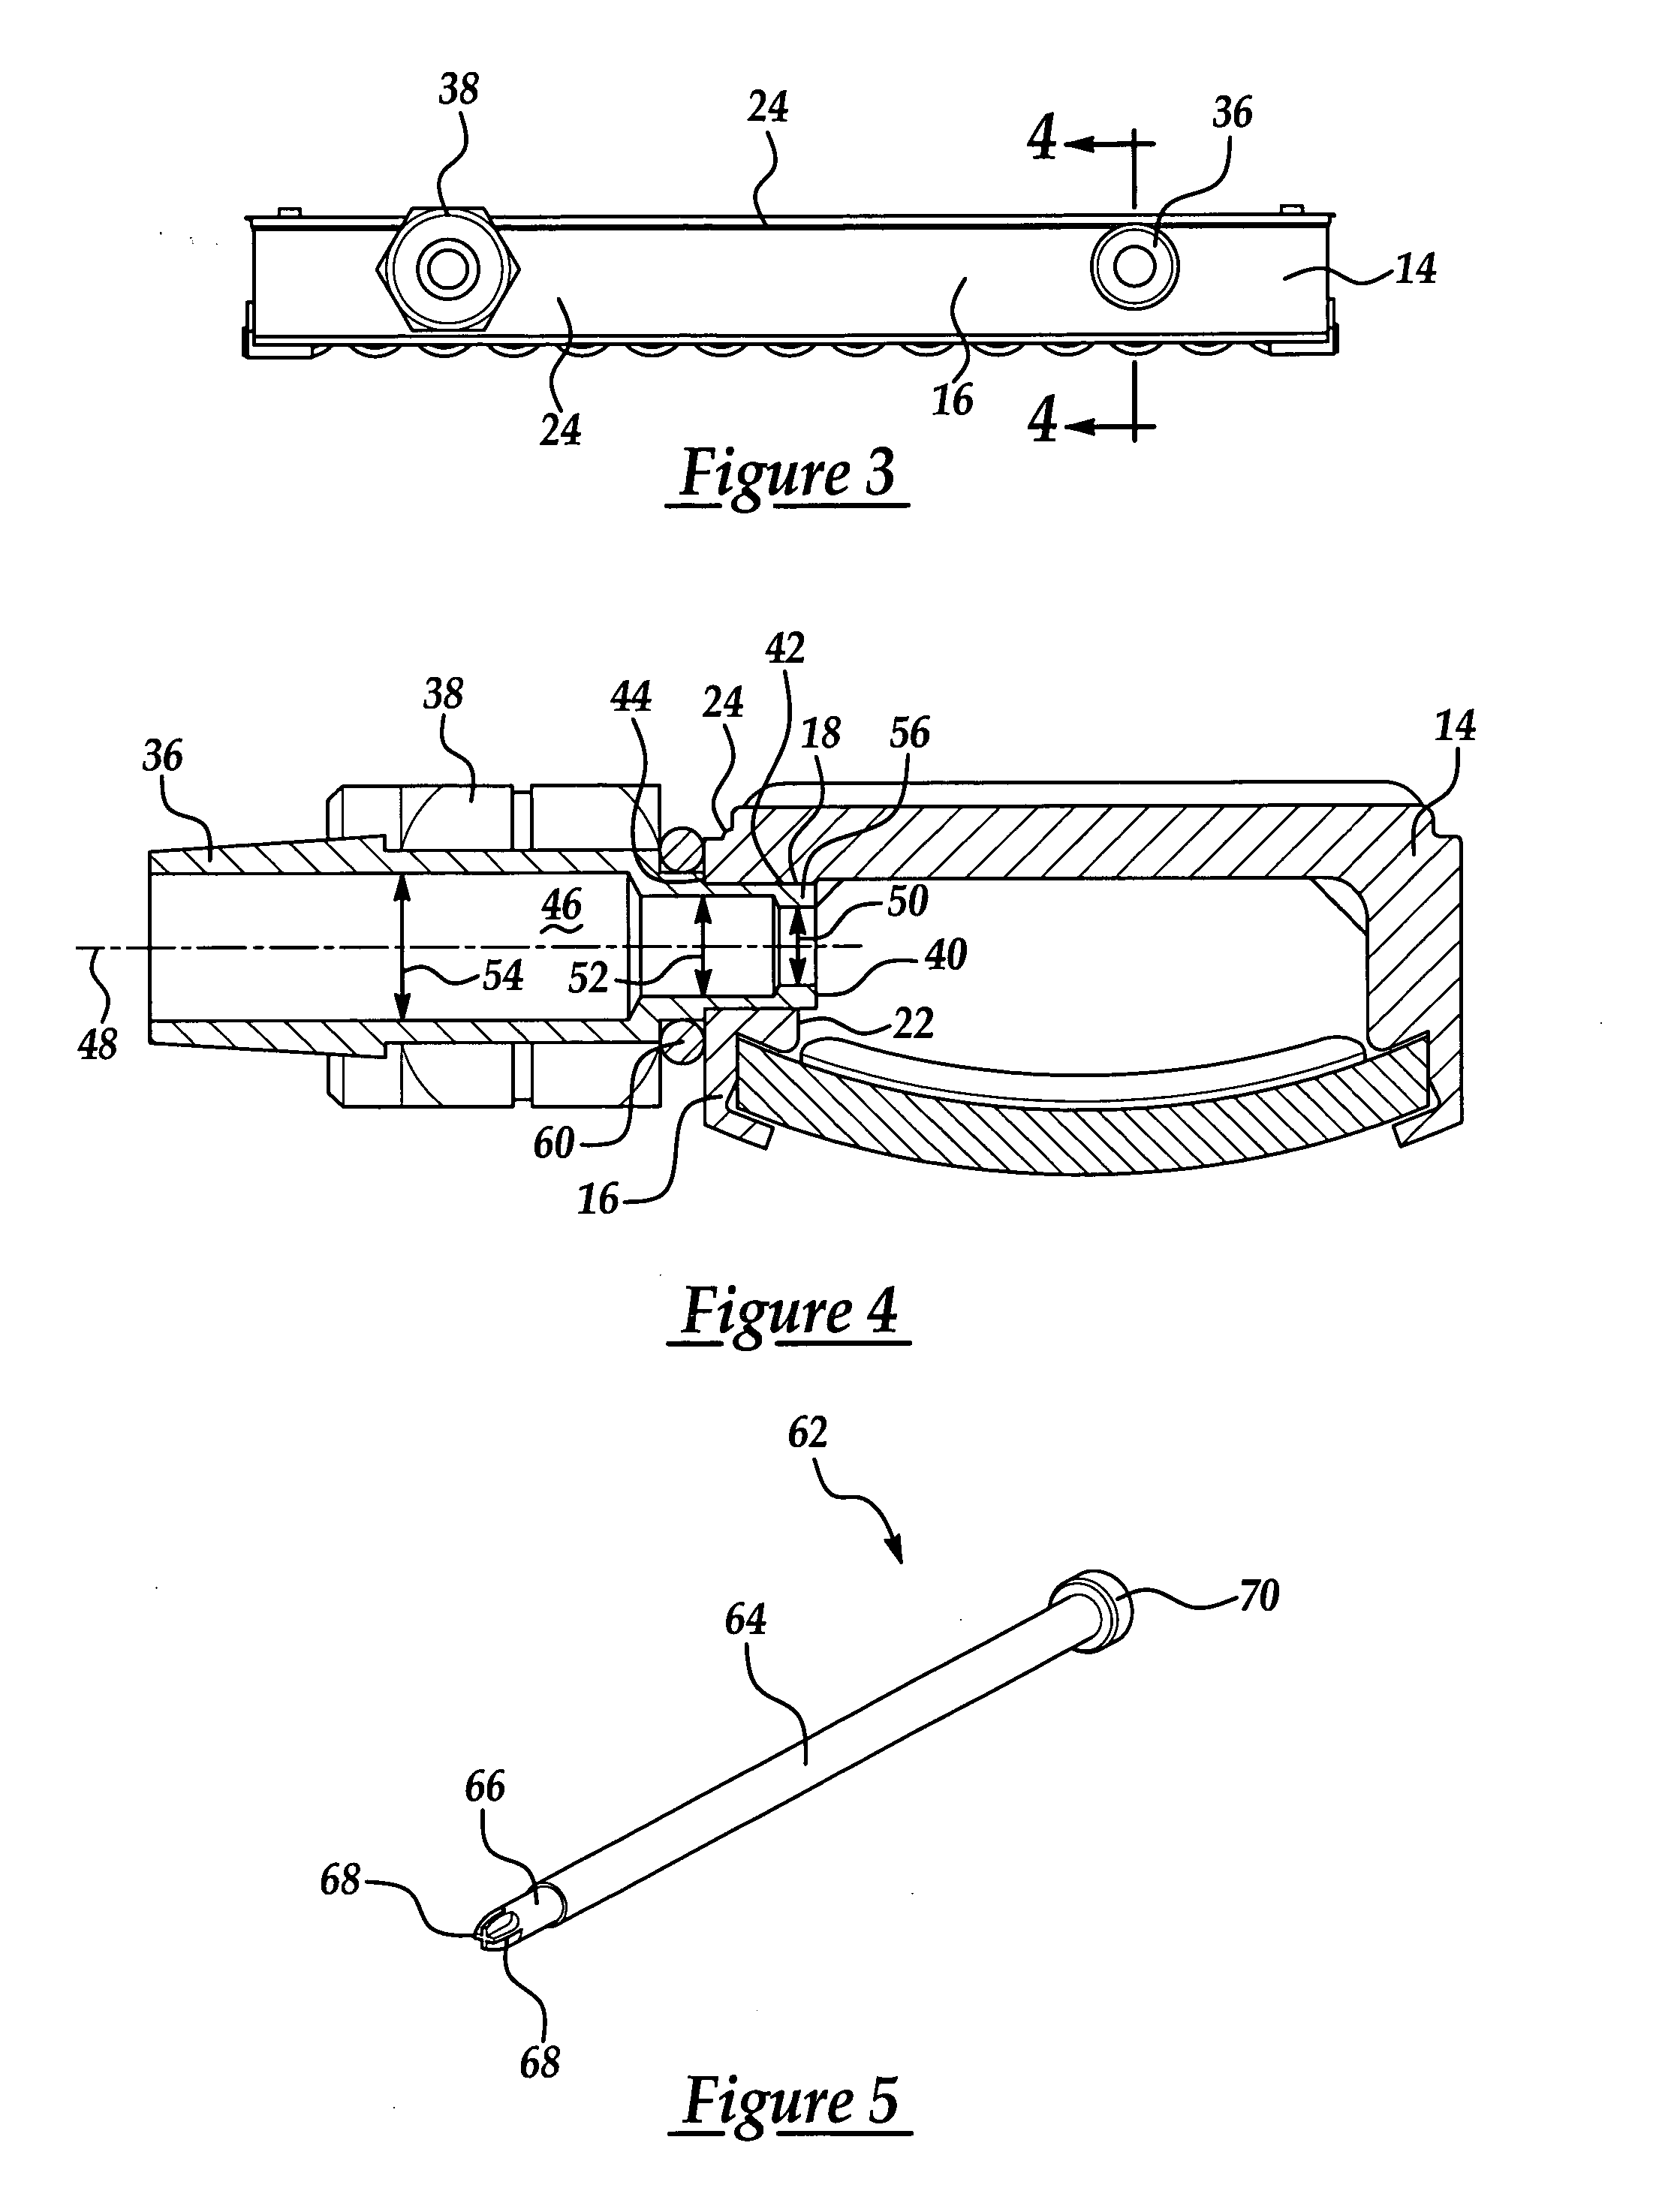 Heat exchanger assembly having fitting secured thereto and method of securing the same